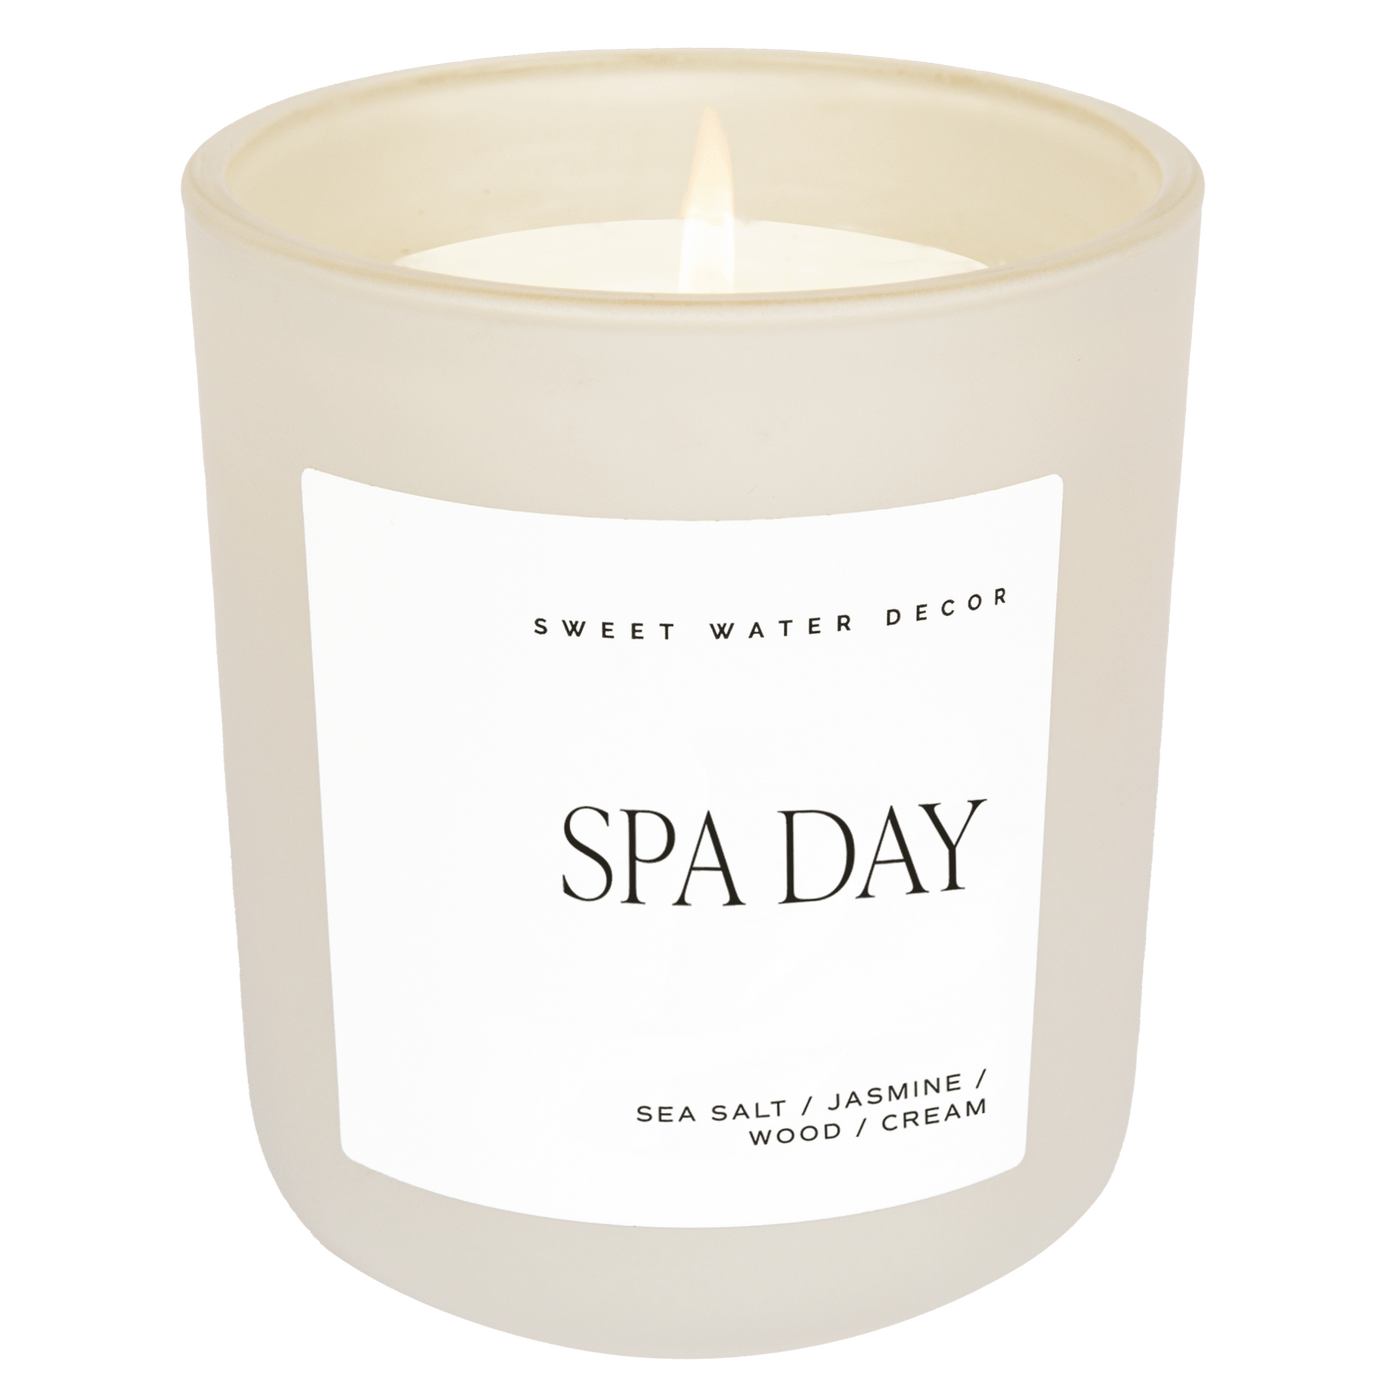 Spa Day Soy Candle - Tan Matte Jar - 15 oz - Sweet Water Decor - Candles